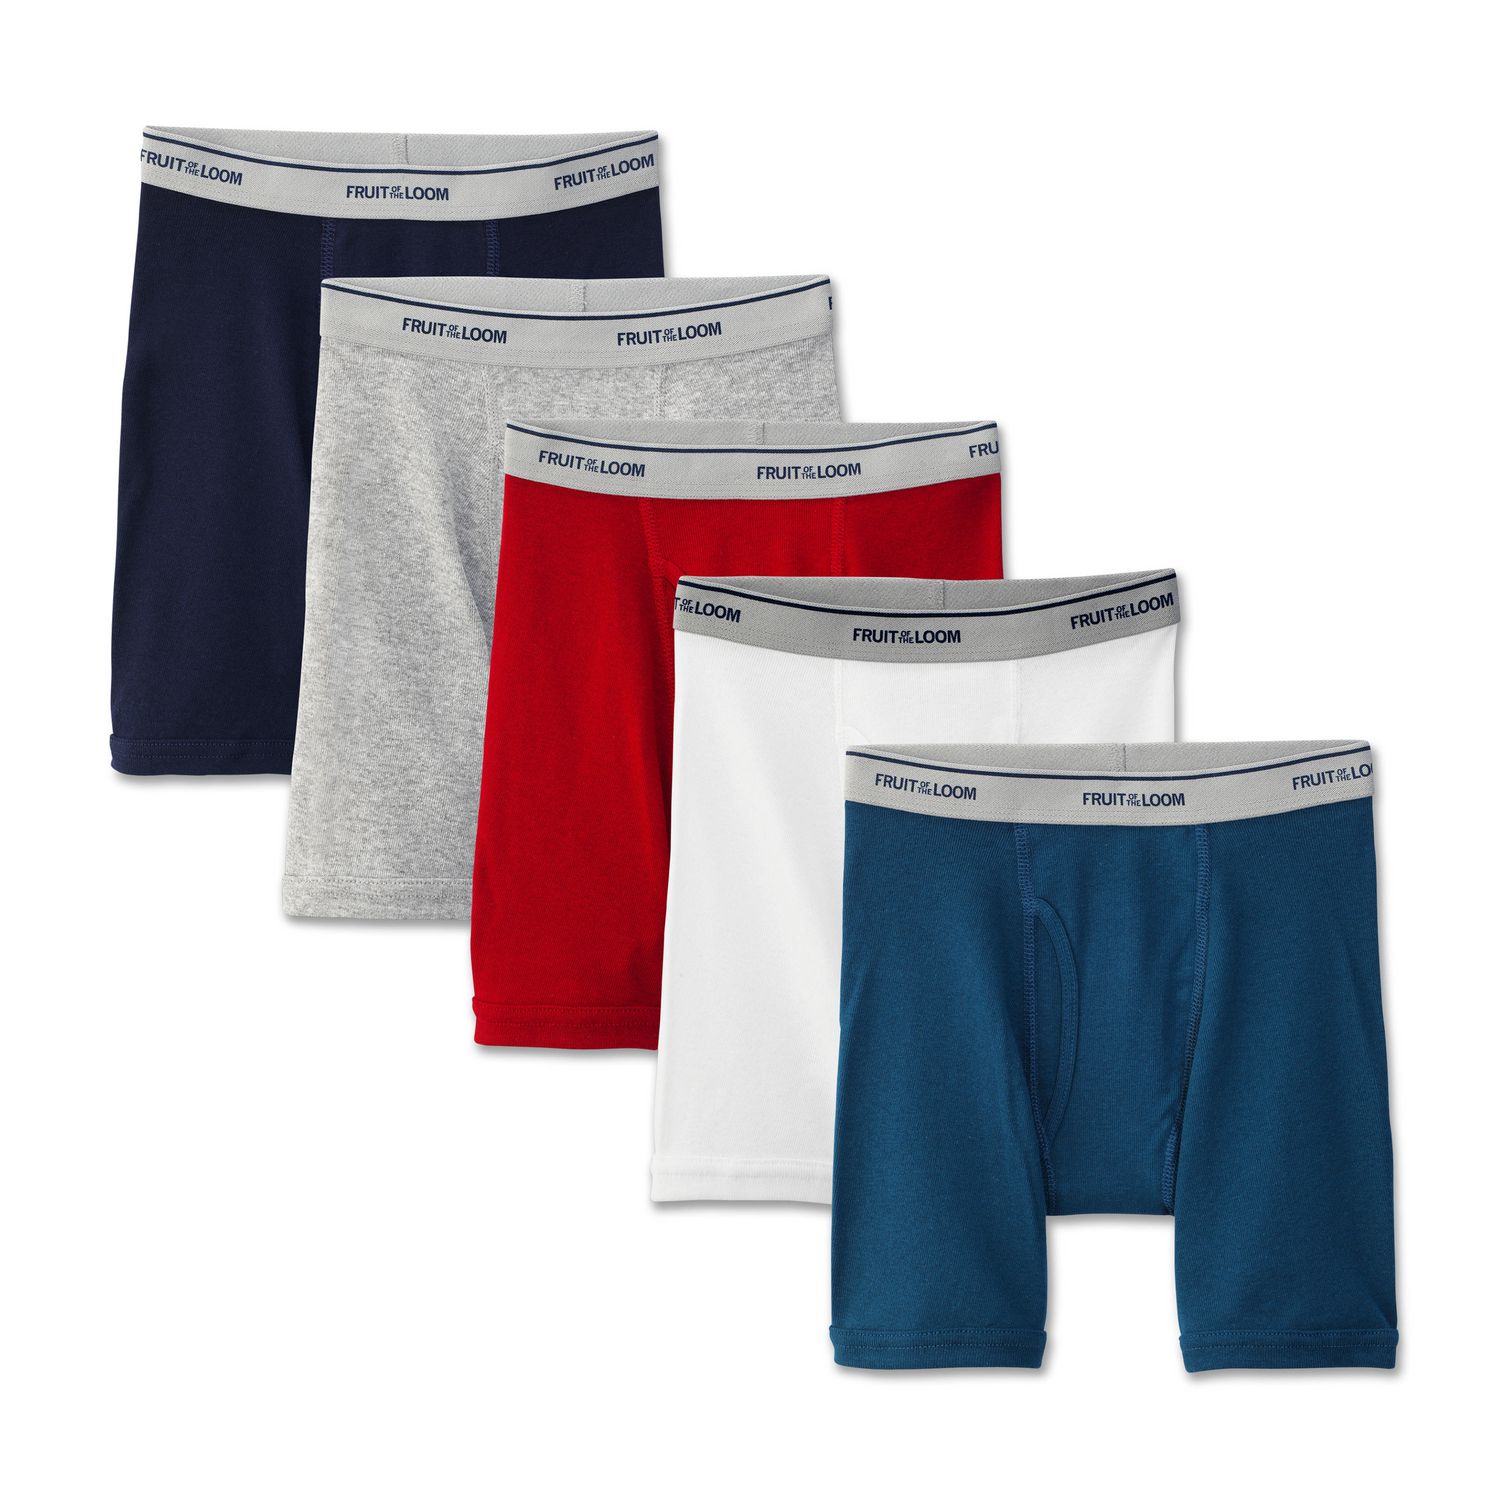 Fruit of the Loom Boys Boxer Briefs, 5-Pack | Walmart Canada